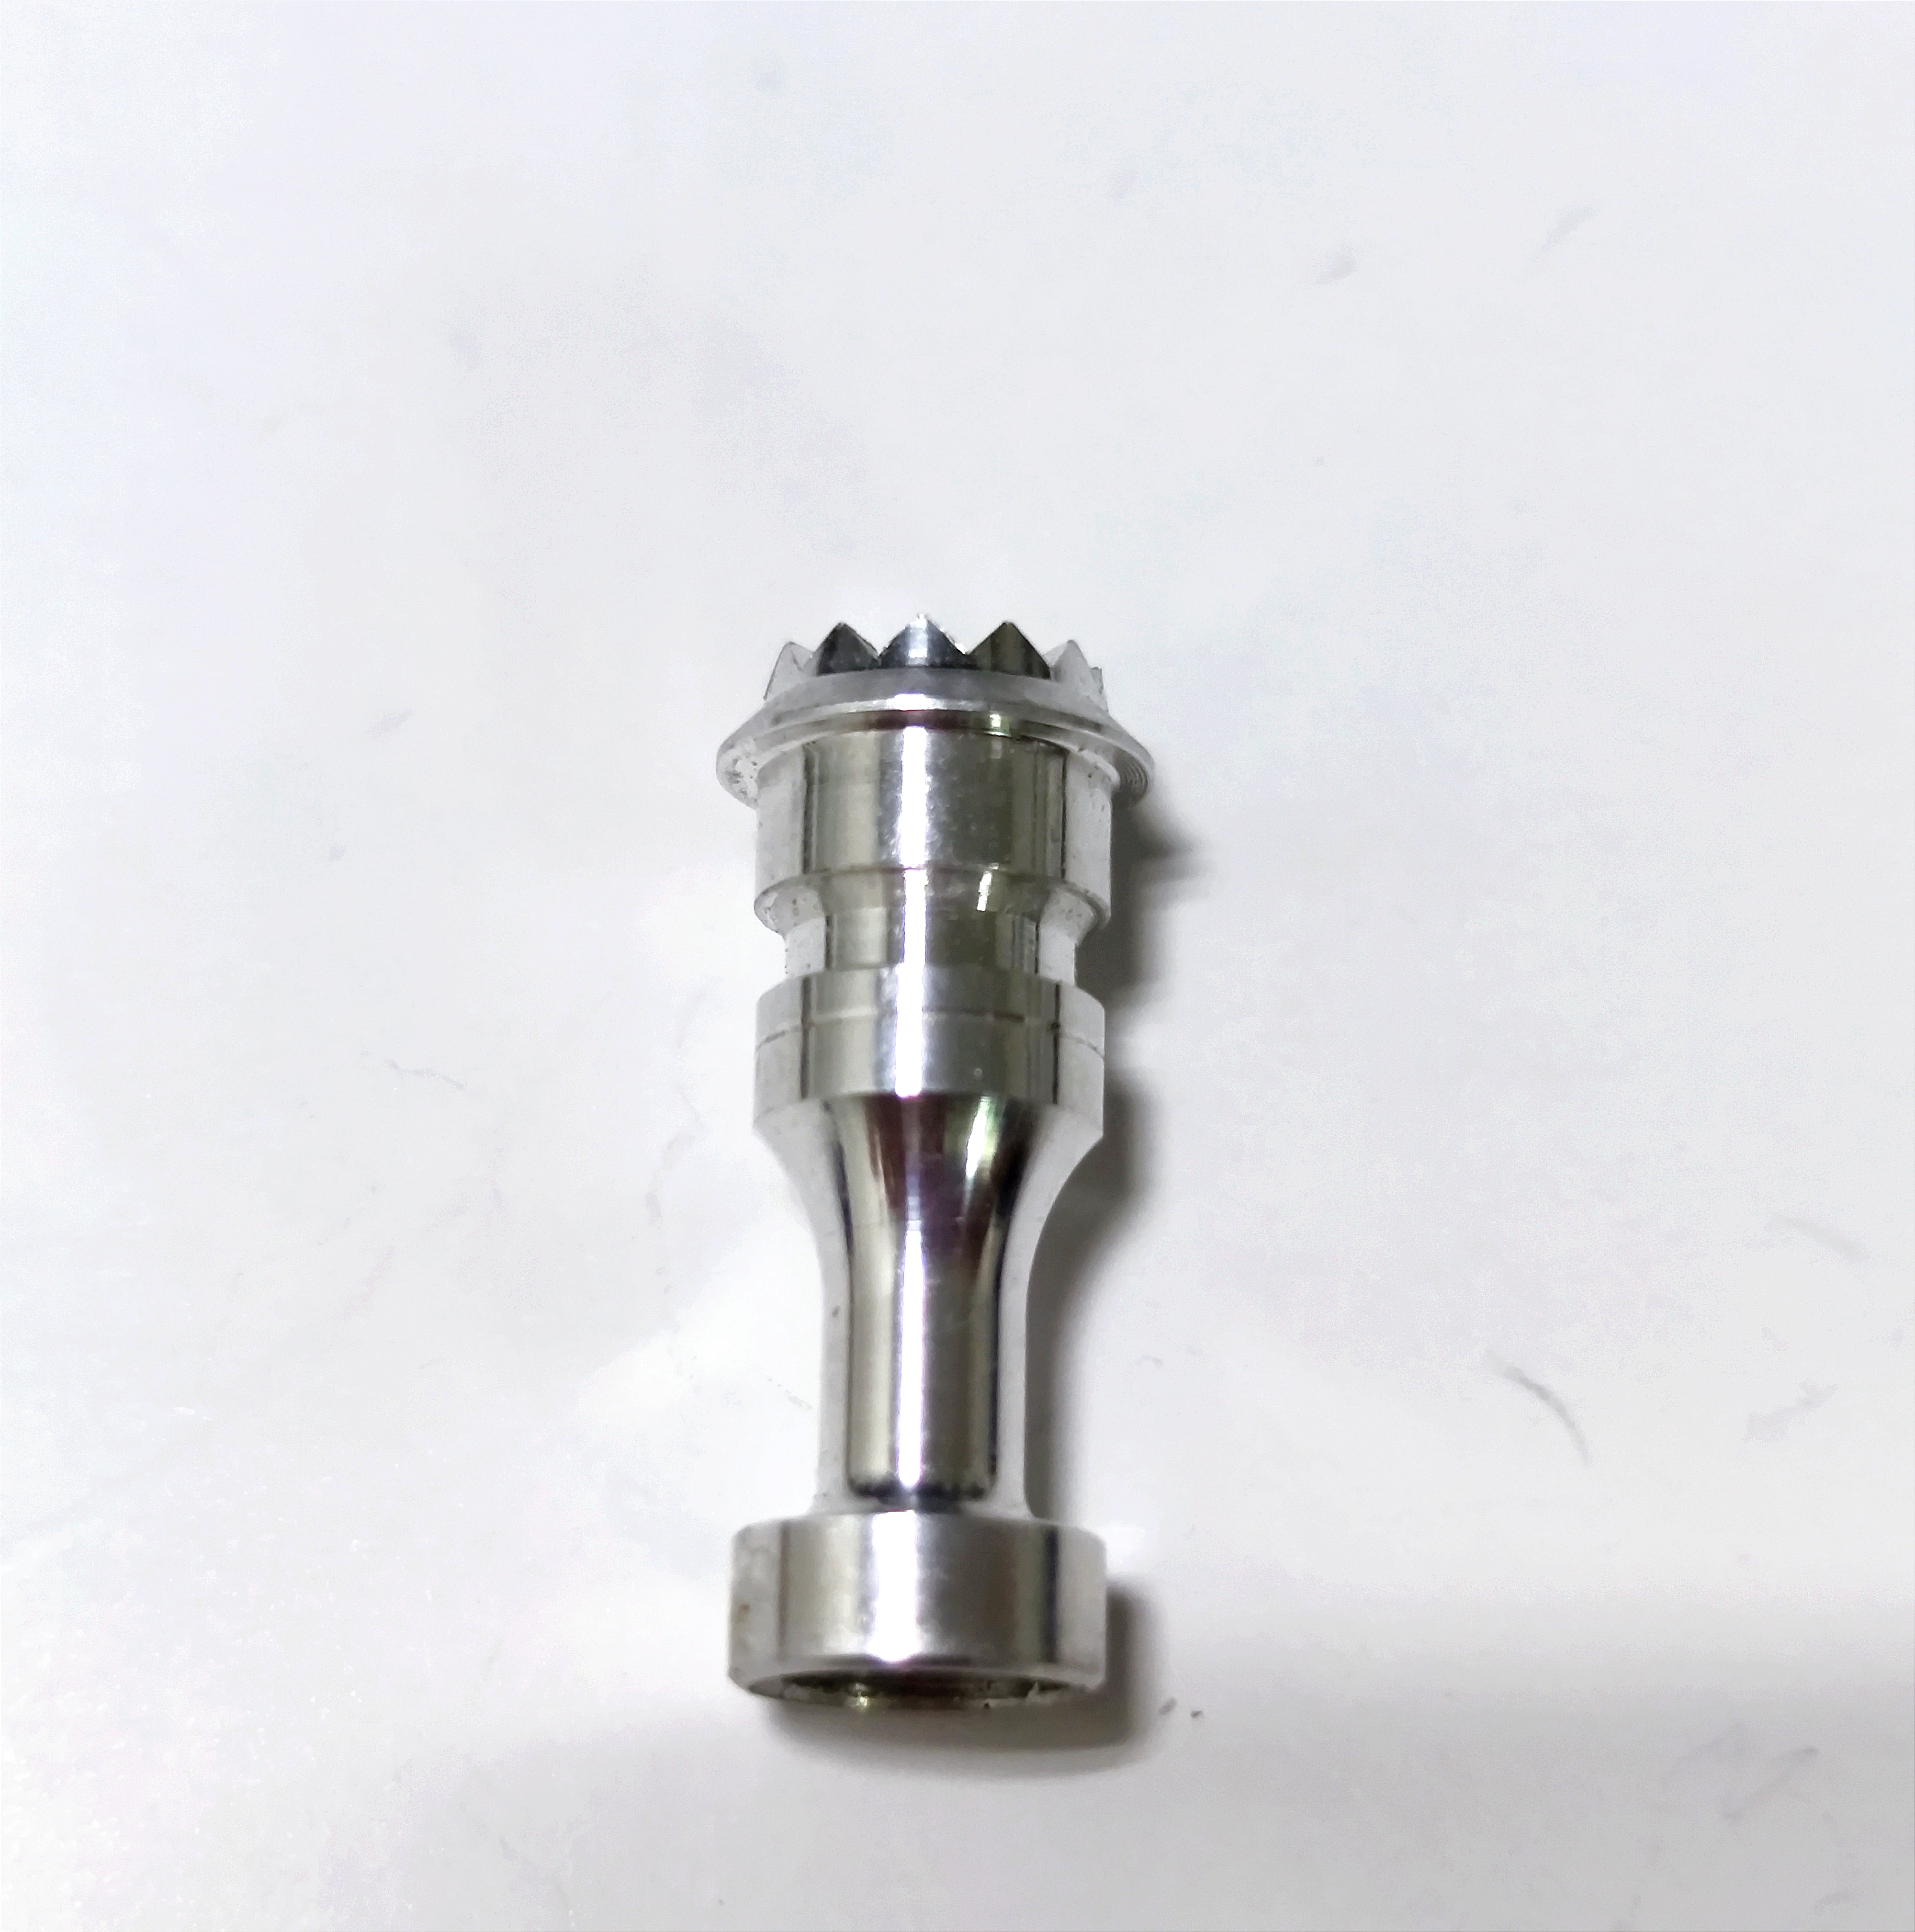  Customized stainless steel cnc Machining Parts, milling/polishing parts metal parts for furniture hardware accessories